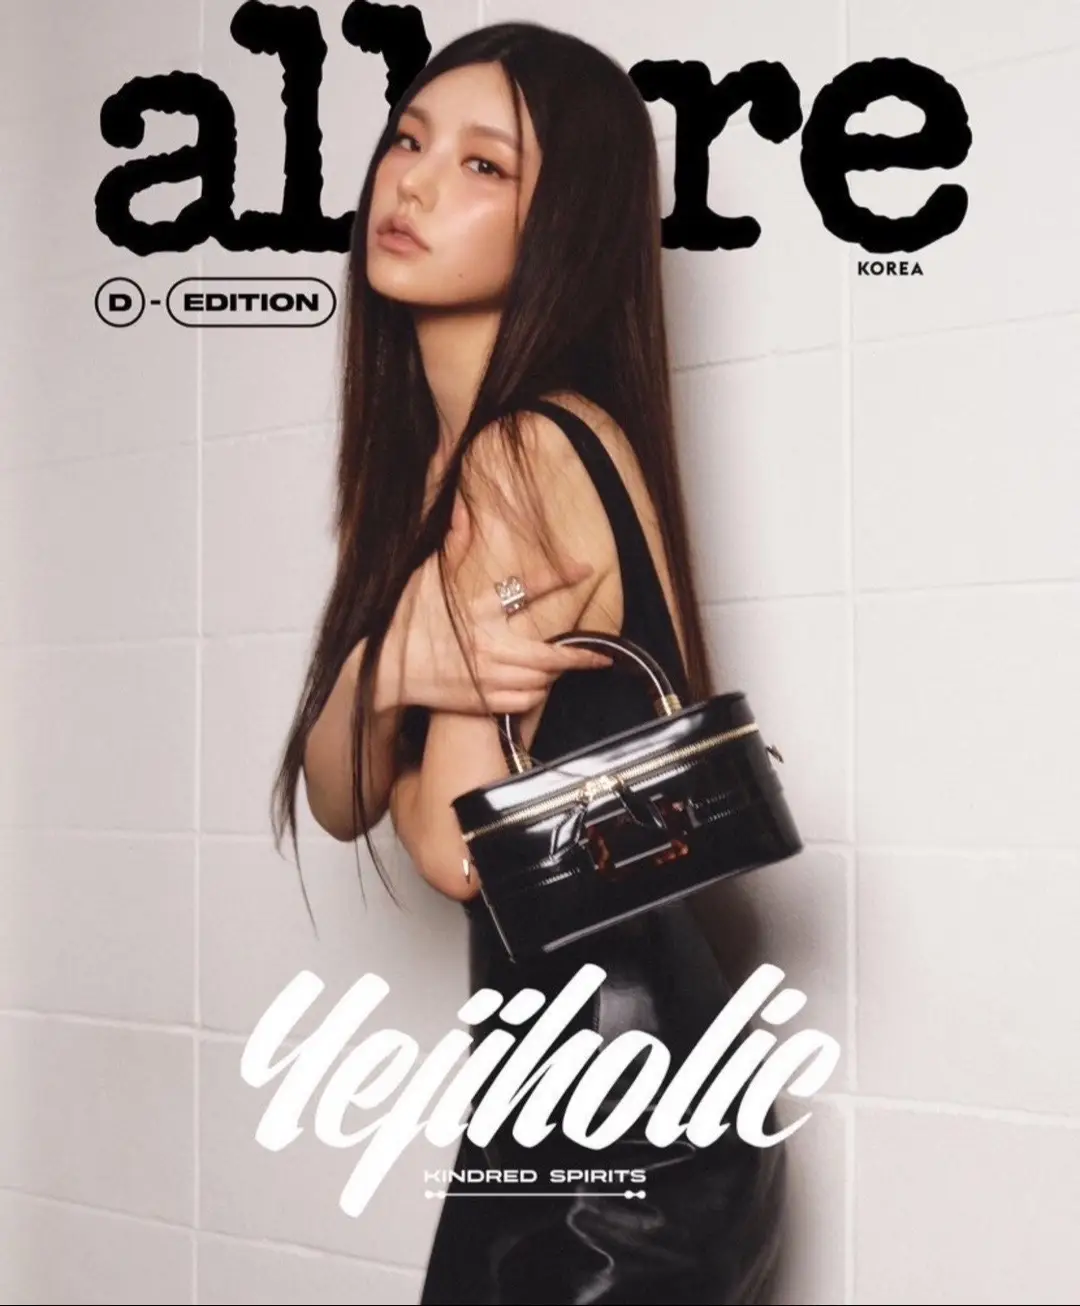 Who could be this talented and BEAUTIFUL all at the same time? Answer is: HWANG YEJI #yeji #itzy #fyp #kpop #magazine #ate #itgirl #hwangyeji #allure #sohot #attractive #addractive #fyp #foryoupage #kpop #visual #leader #itzyyeji #yejiitzy #stanitzy #fypシ゚ 